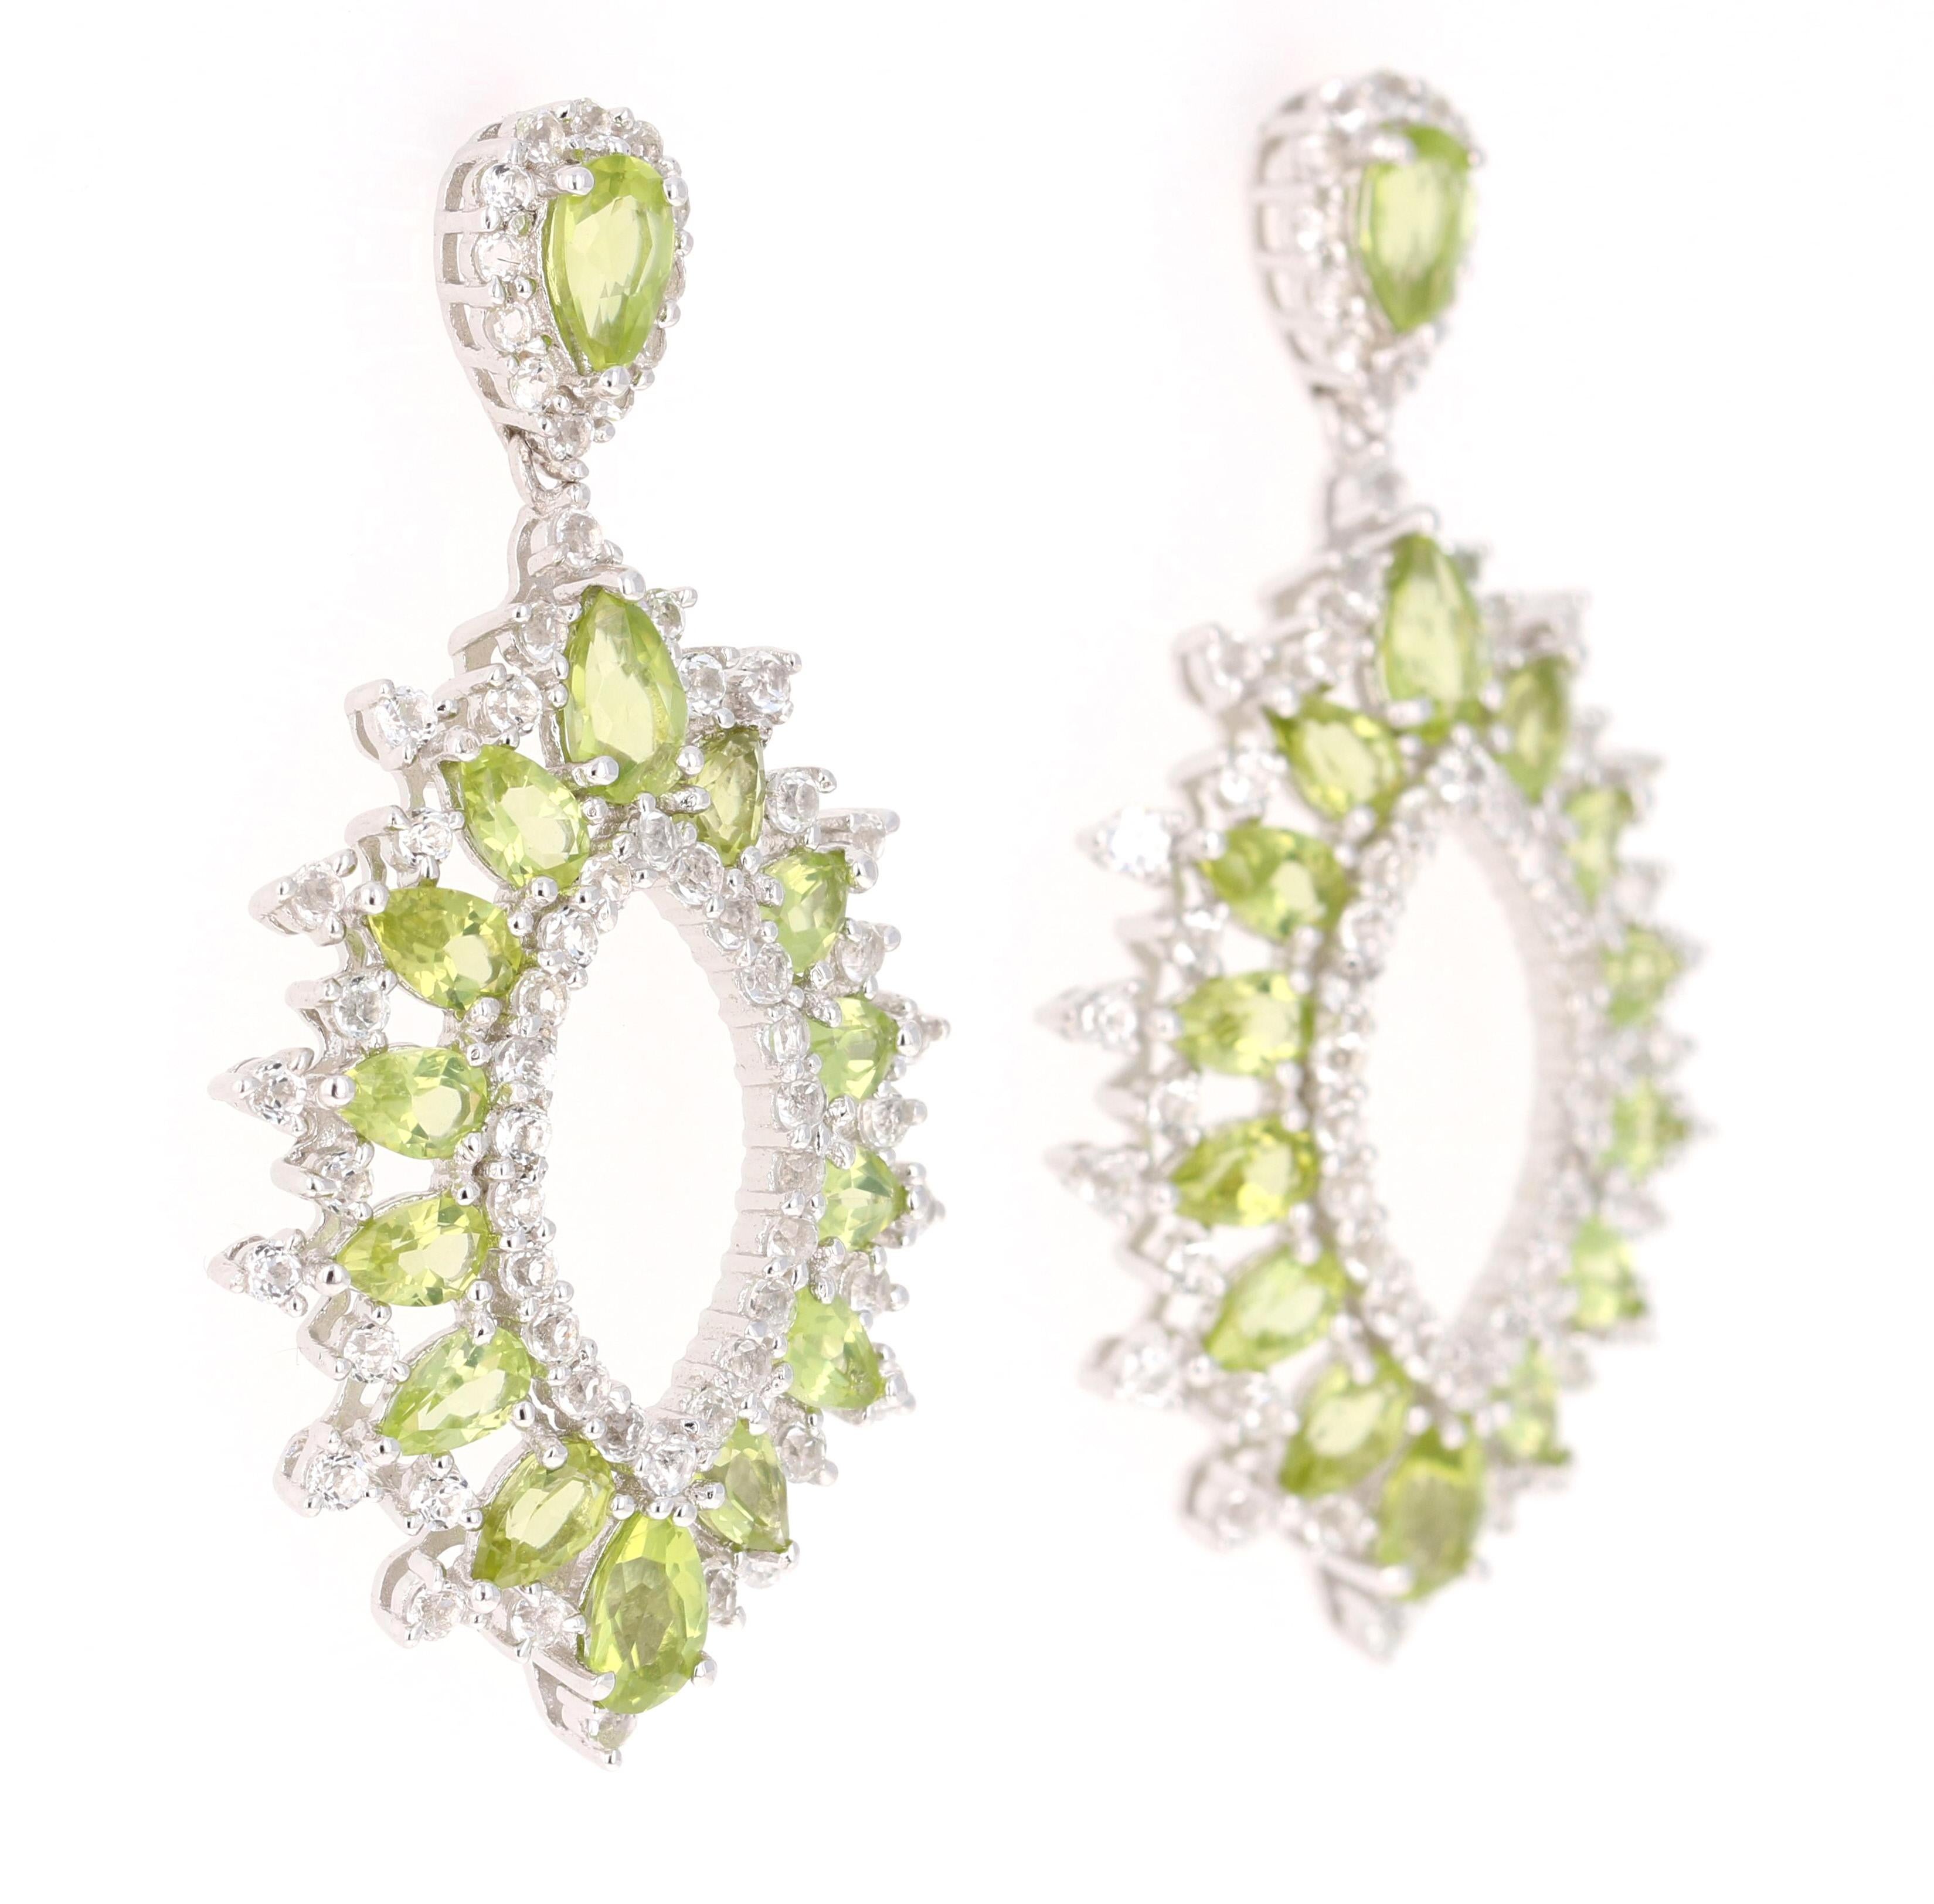 Stunning Dangle Earrings 

These earrings have 6.25 Carats of Peridot and White Topaz

They are beautifully curated in 925 Silver 

They are 1.75 inches long. 
